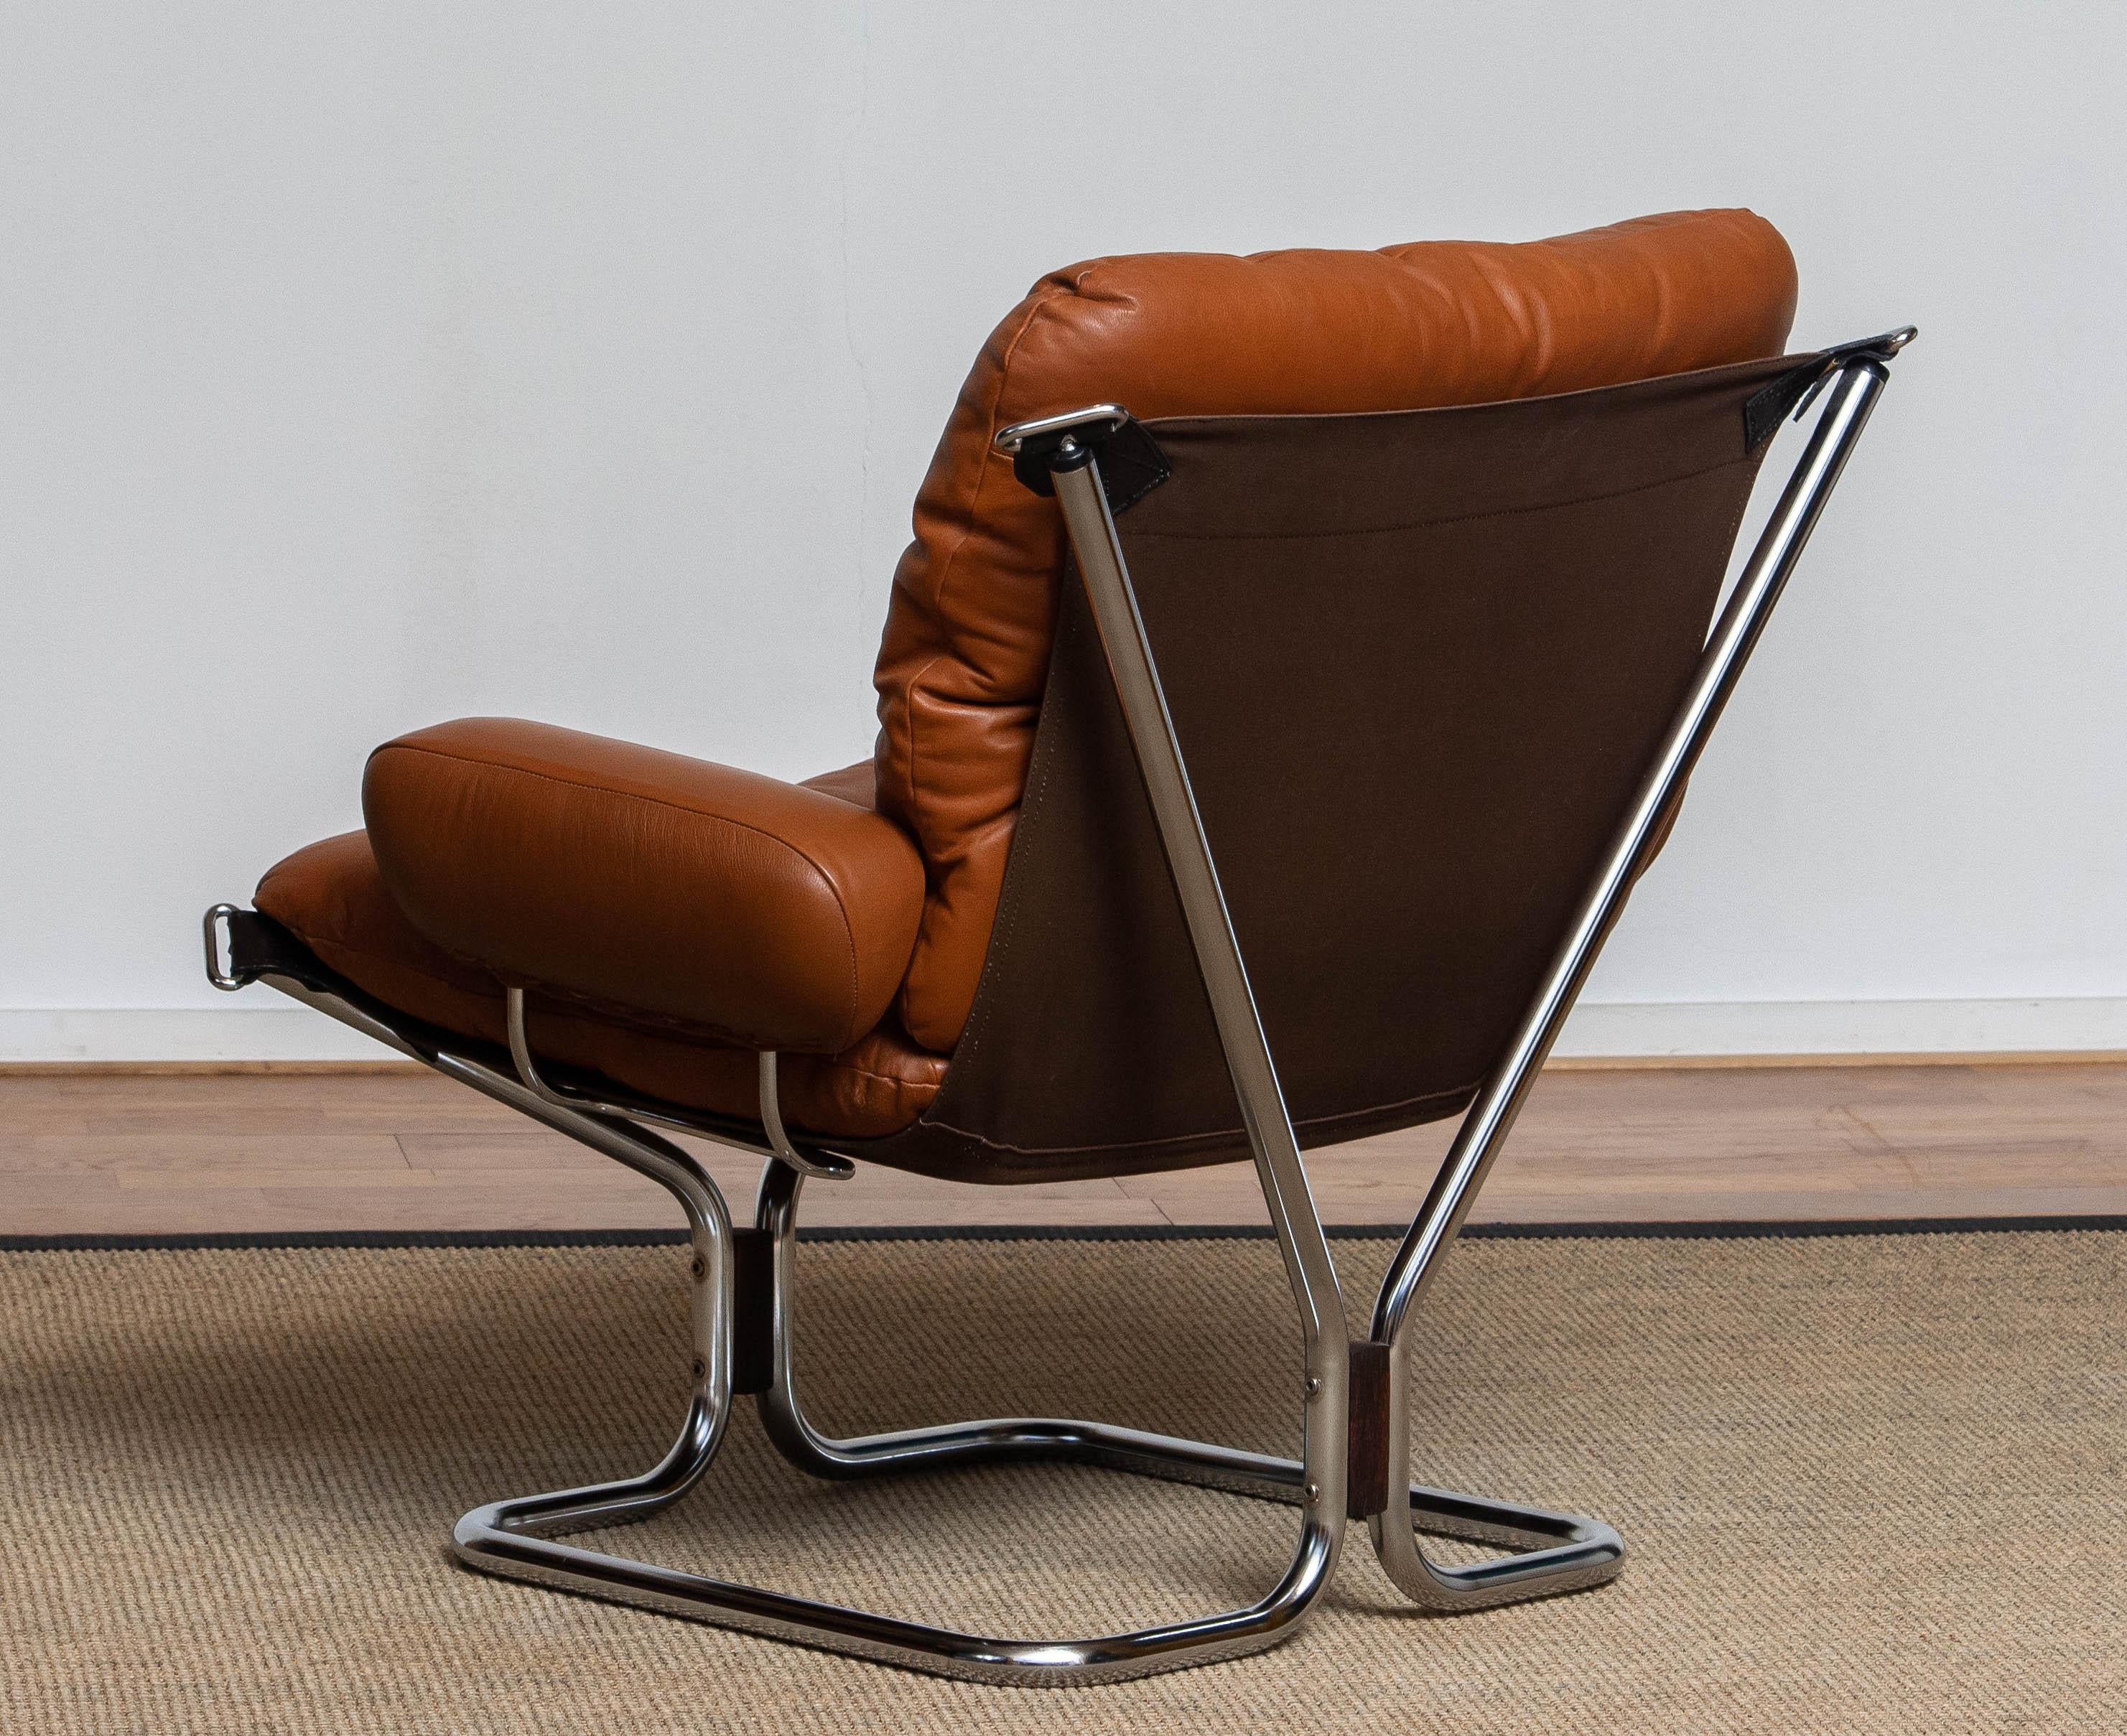 1970's Cognac Leather and Chrome Lounge Chair by Harald Relling for Westnofa In Good Condition In Silvolde, Gelderland